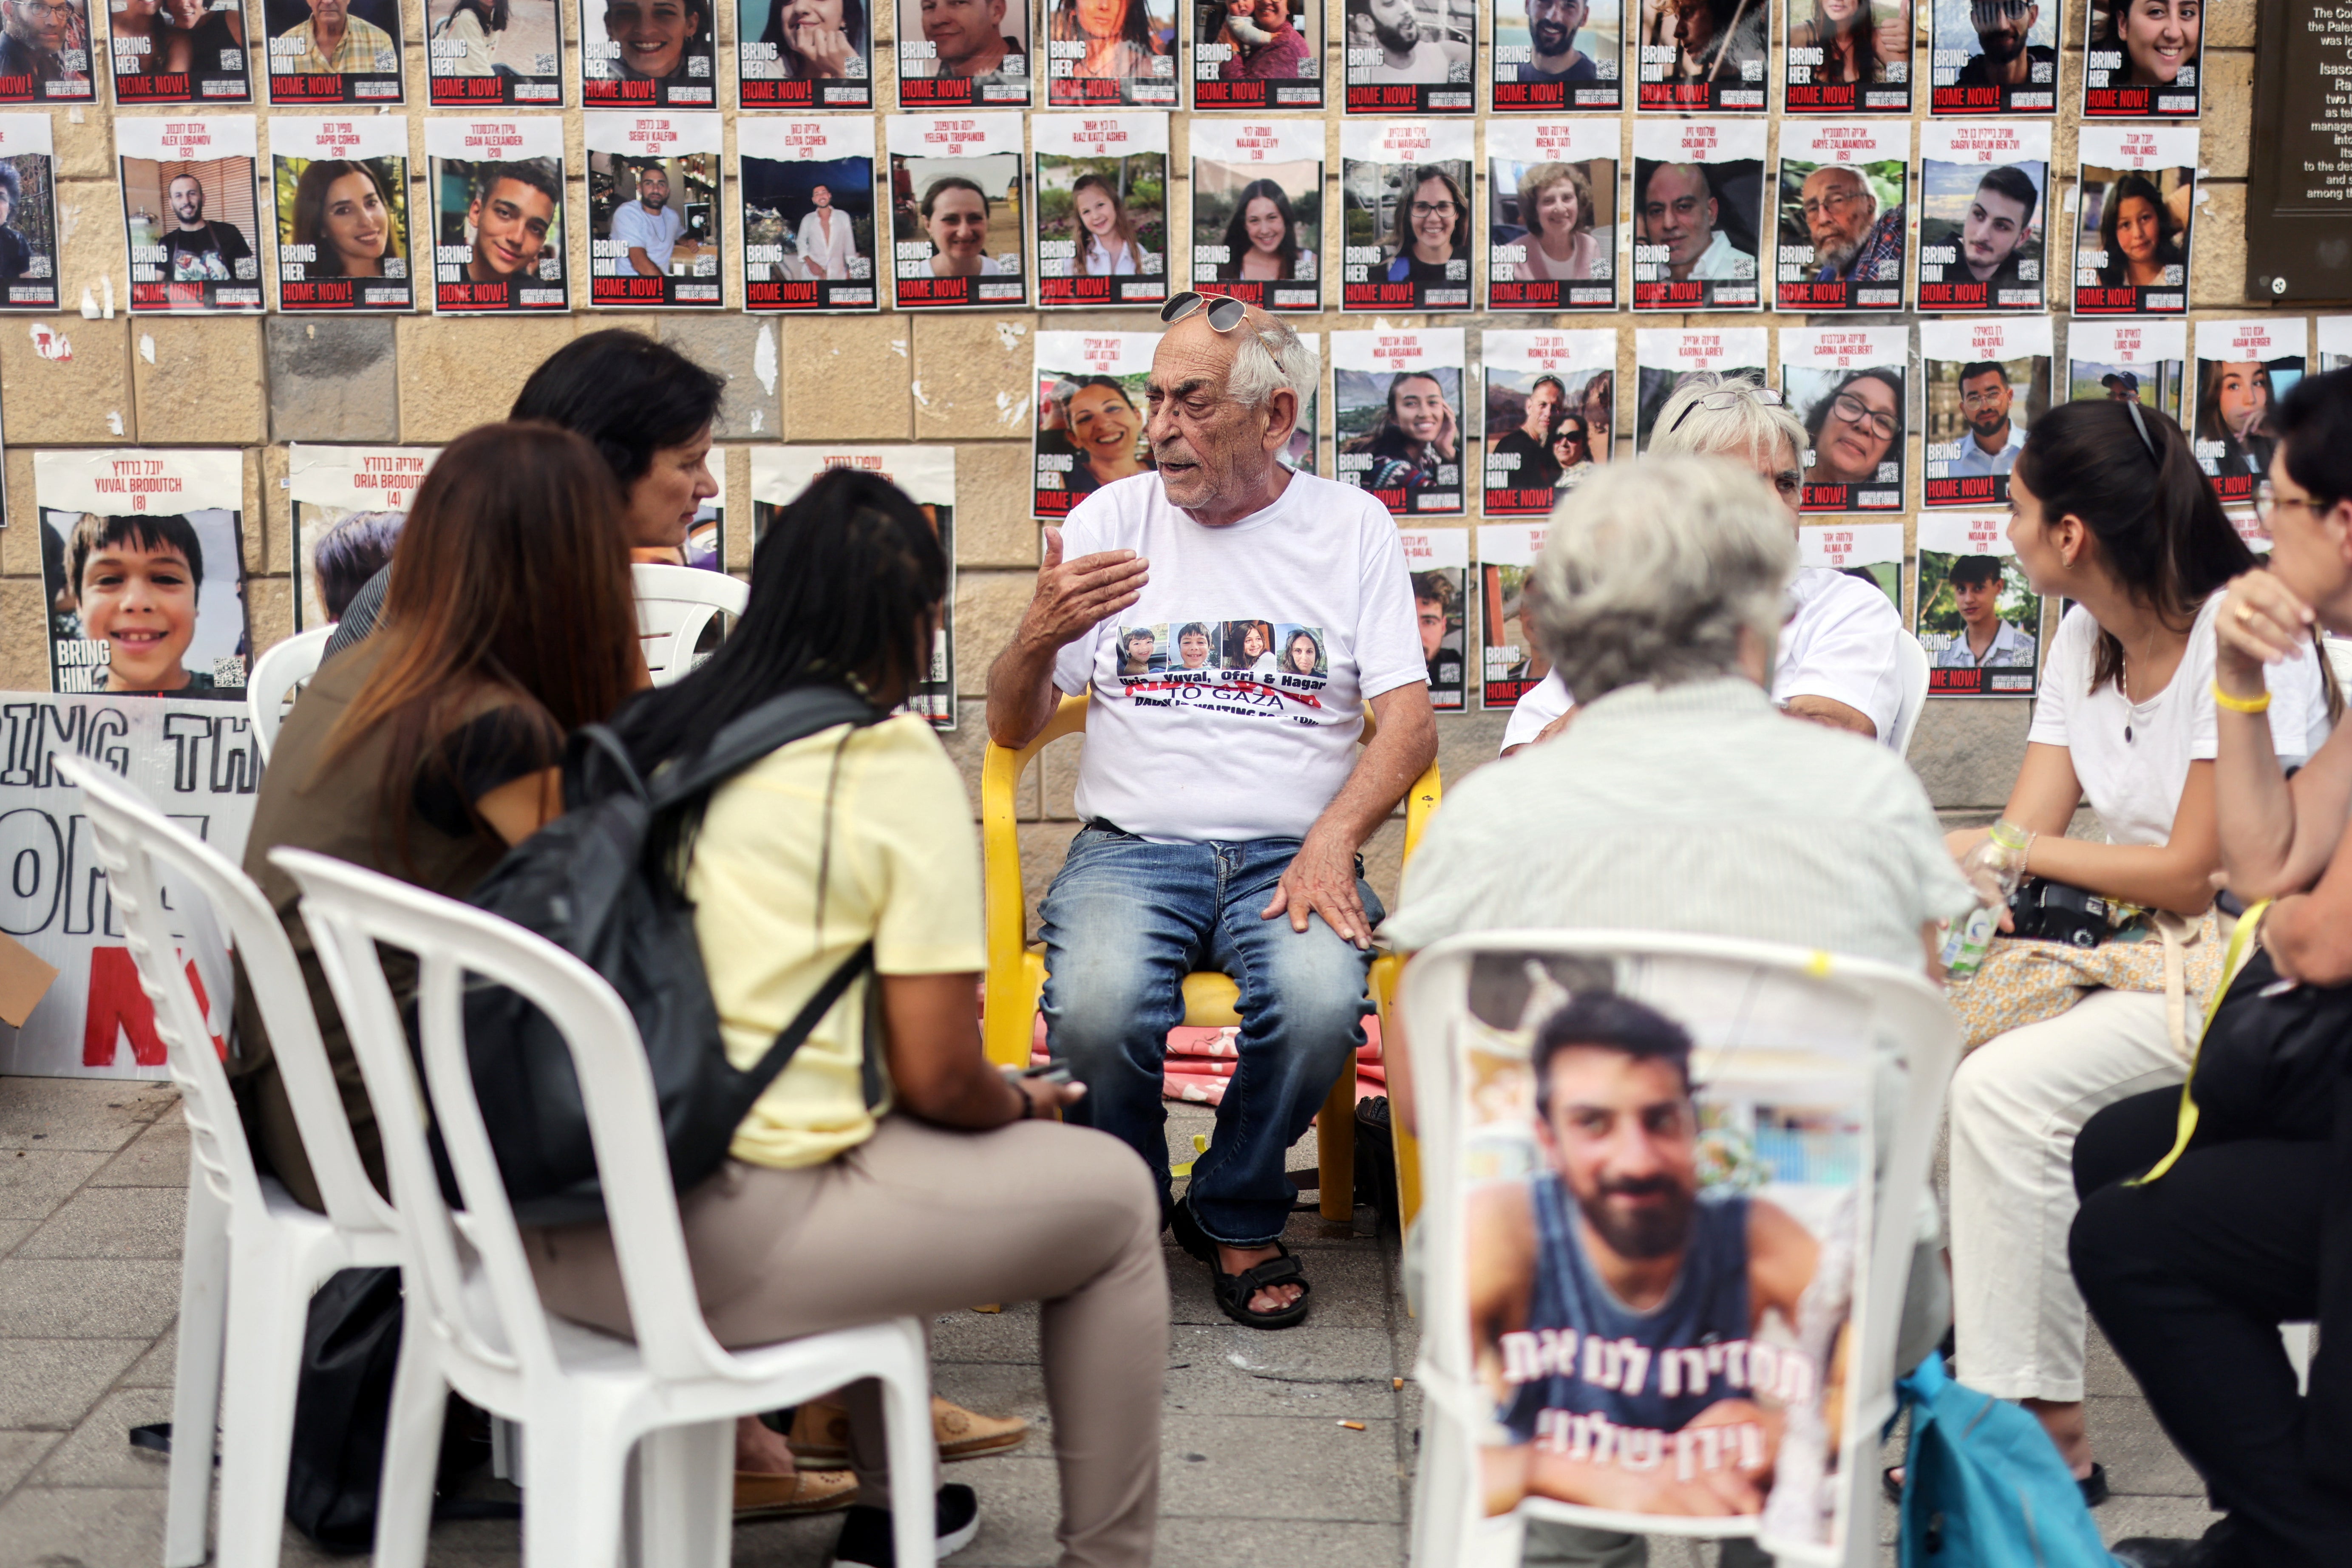 Relatives gather in front of images of those missing in Tel Aviv